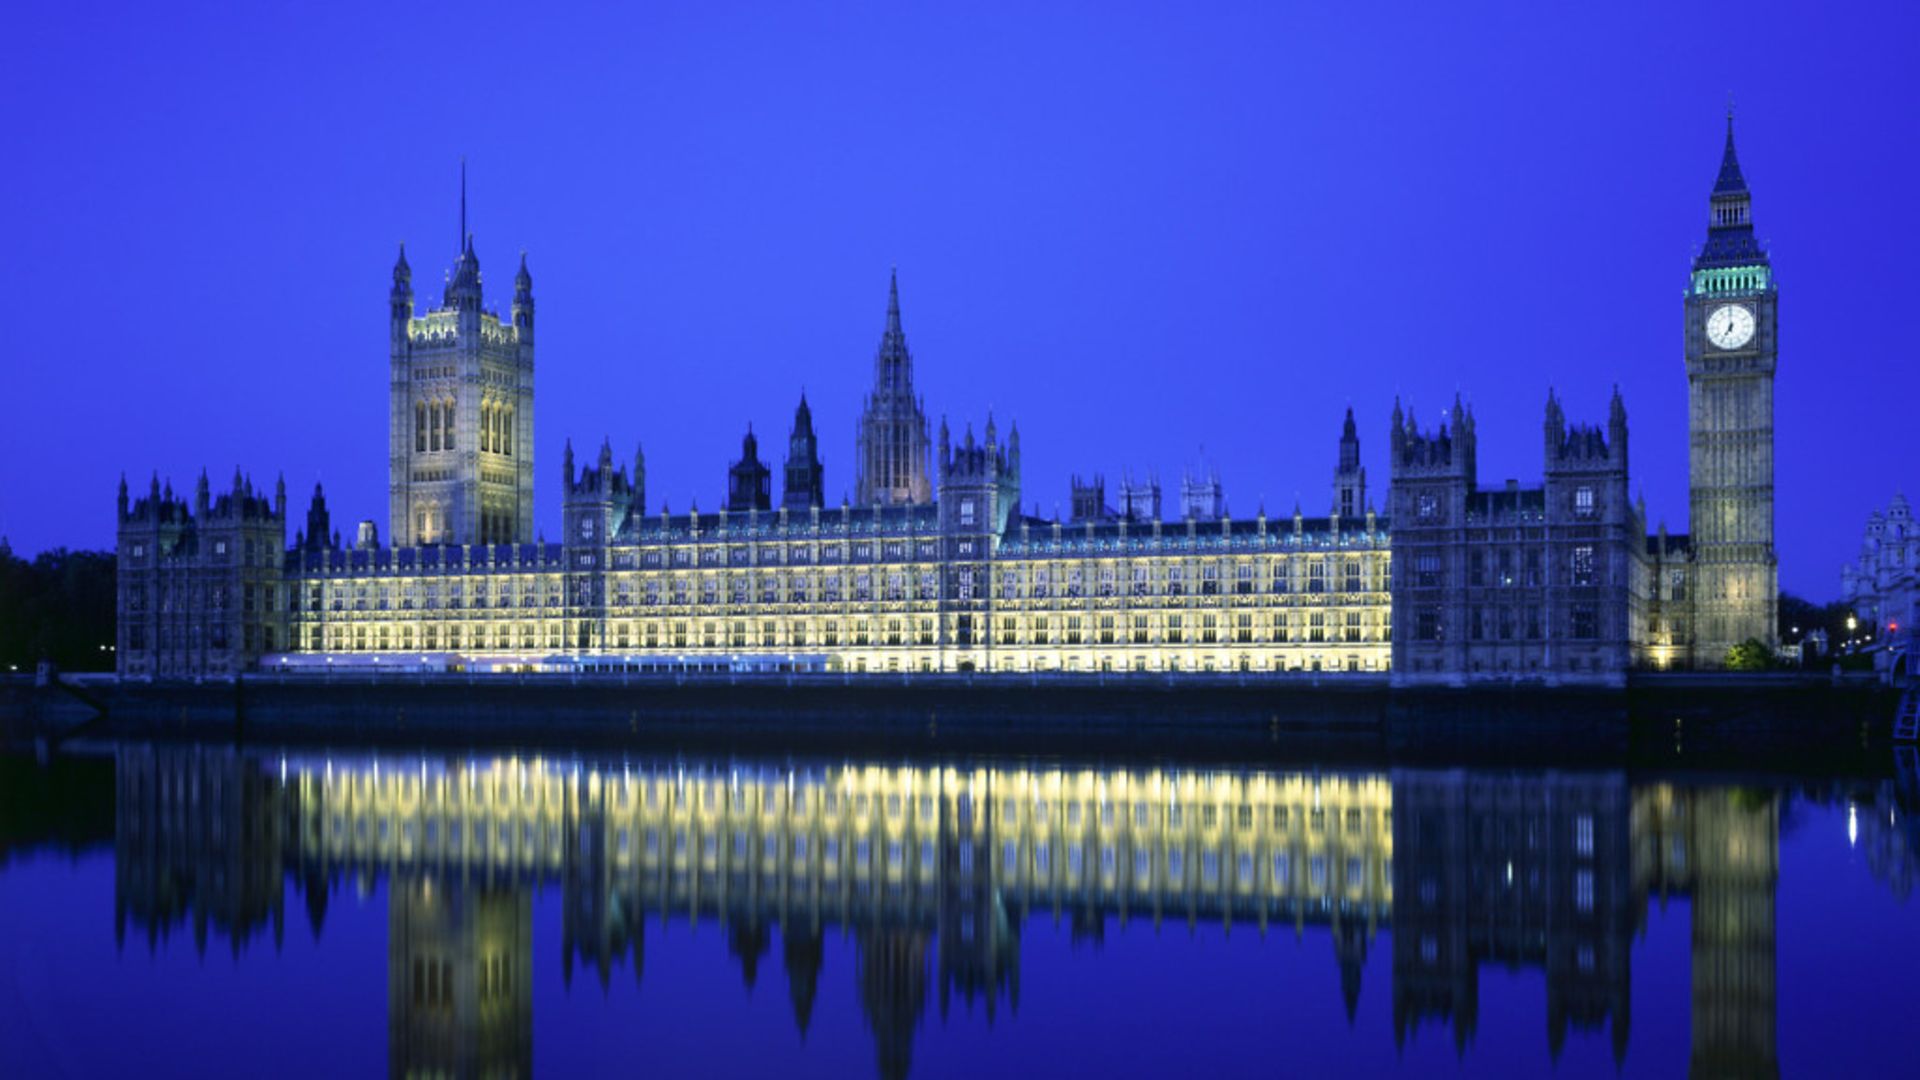 The Palace of Westminster at night - Credit: Getty Images